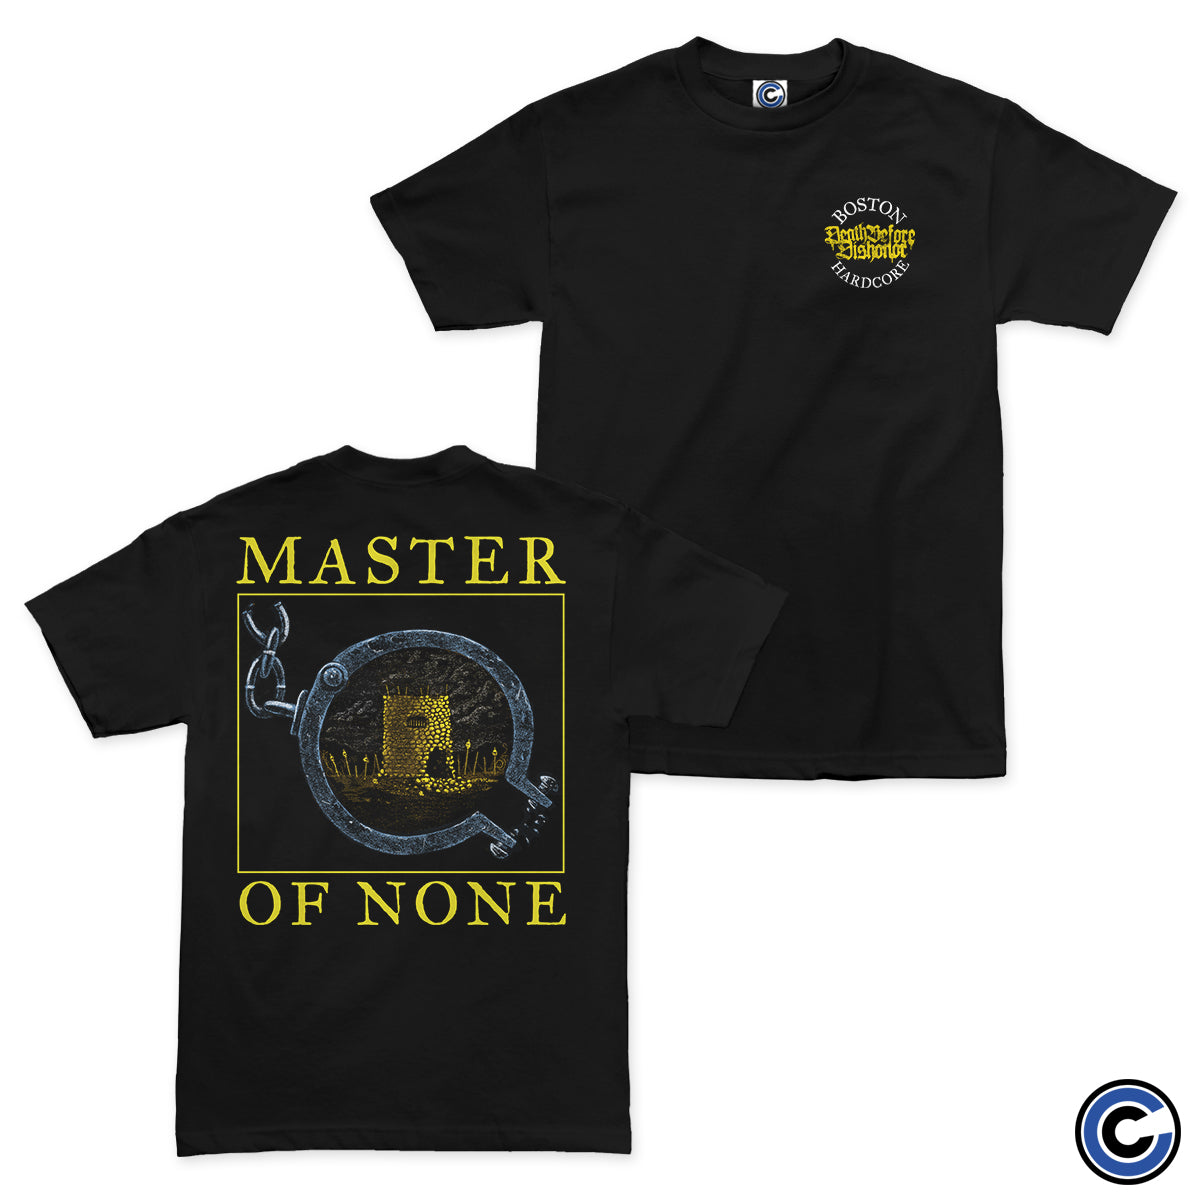 Death Before Dishonor "Master Of None" Shirt